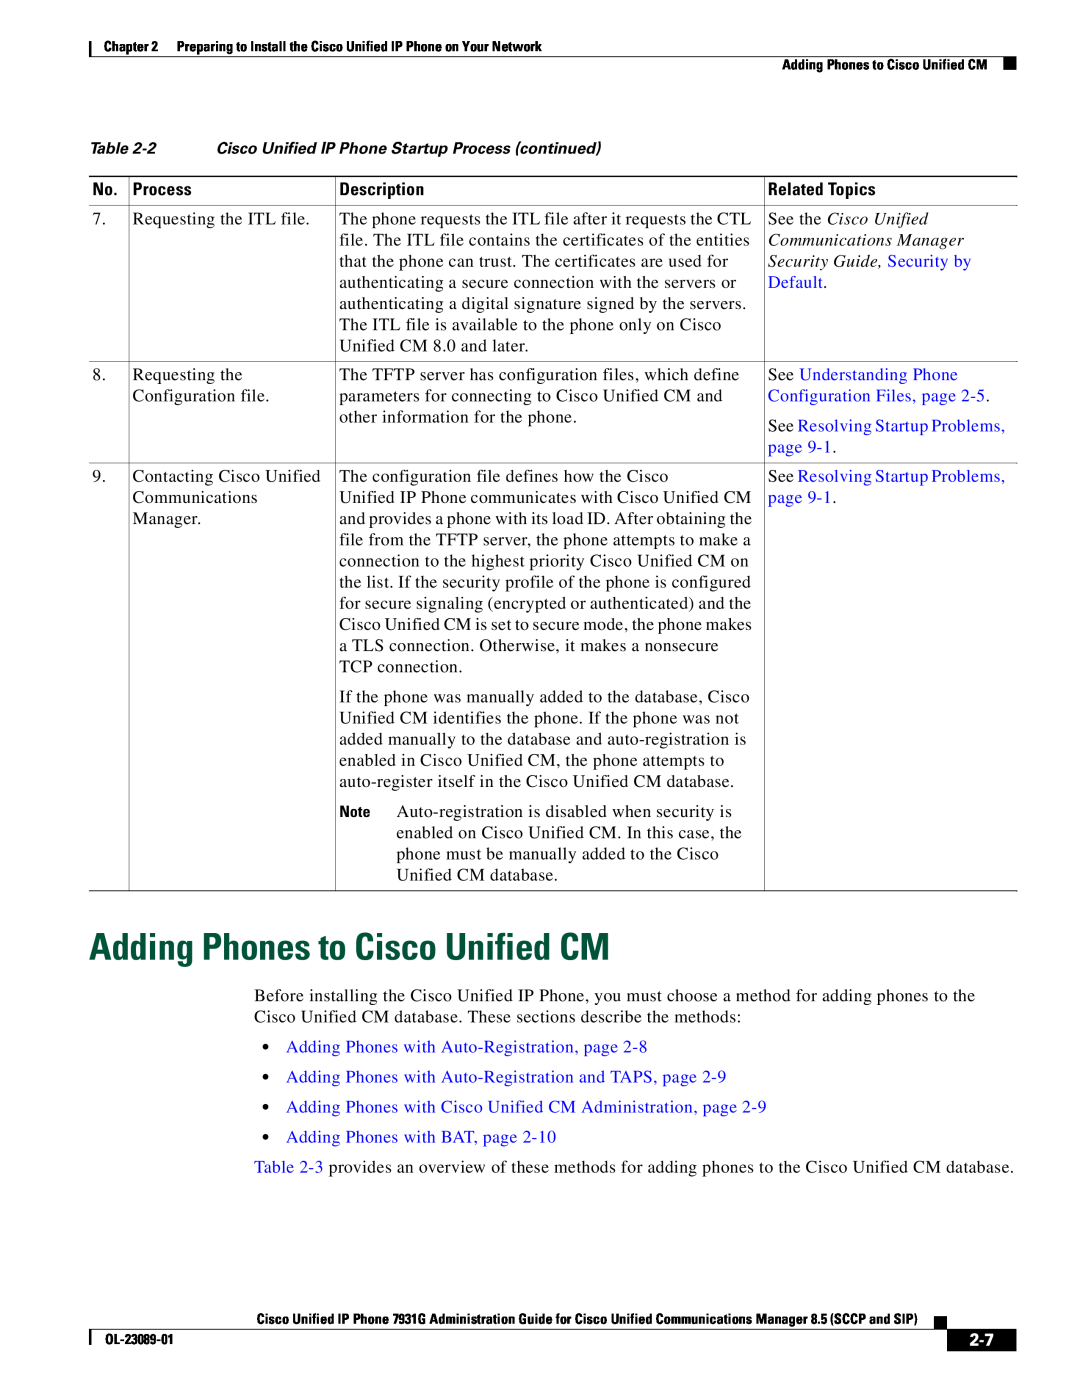 Cisco Systems OL-23089-01 Adding Phones to Cisco Unified CM, Security Guide, Security by, Default, See Understanding Phone 